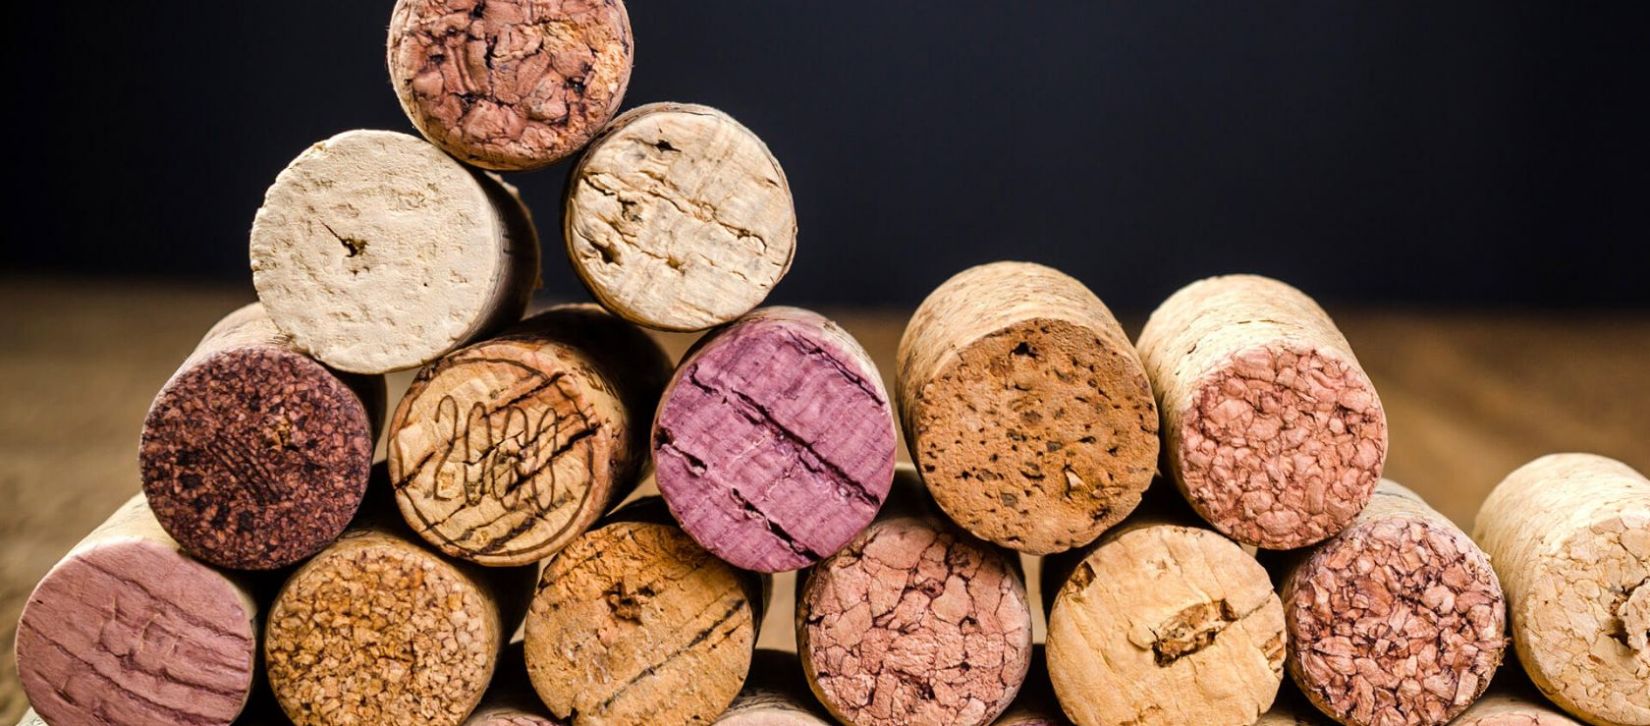 Photo for: The Rise of Alternative Wine Closures- Are Corks on the Way Out?